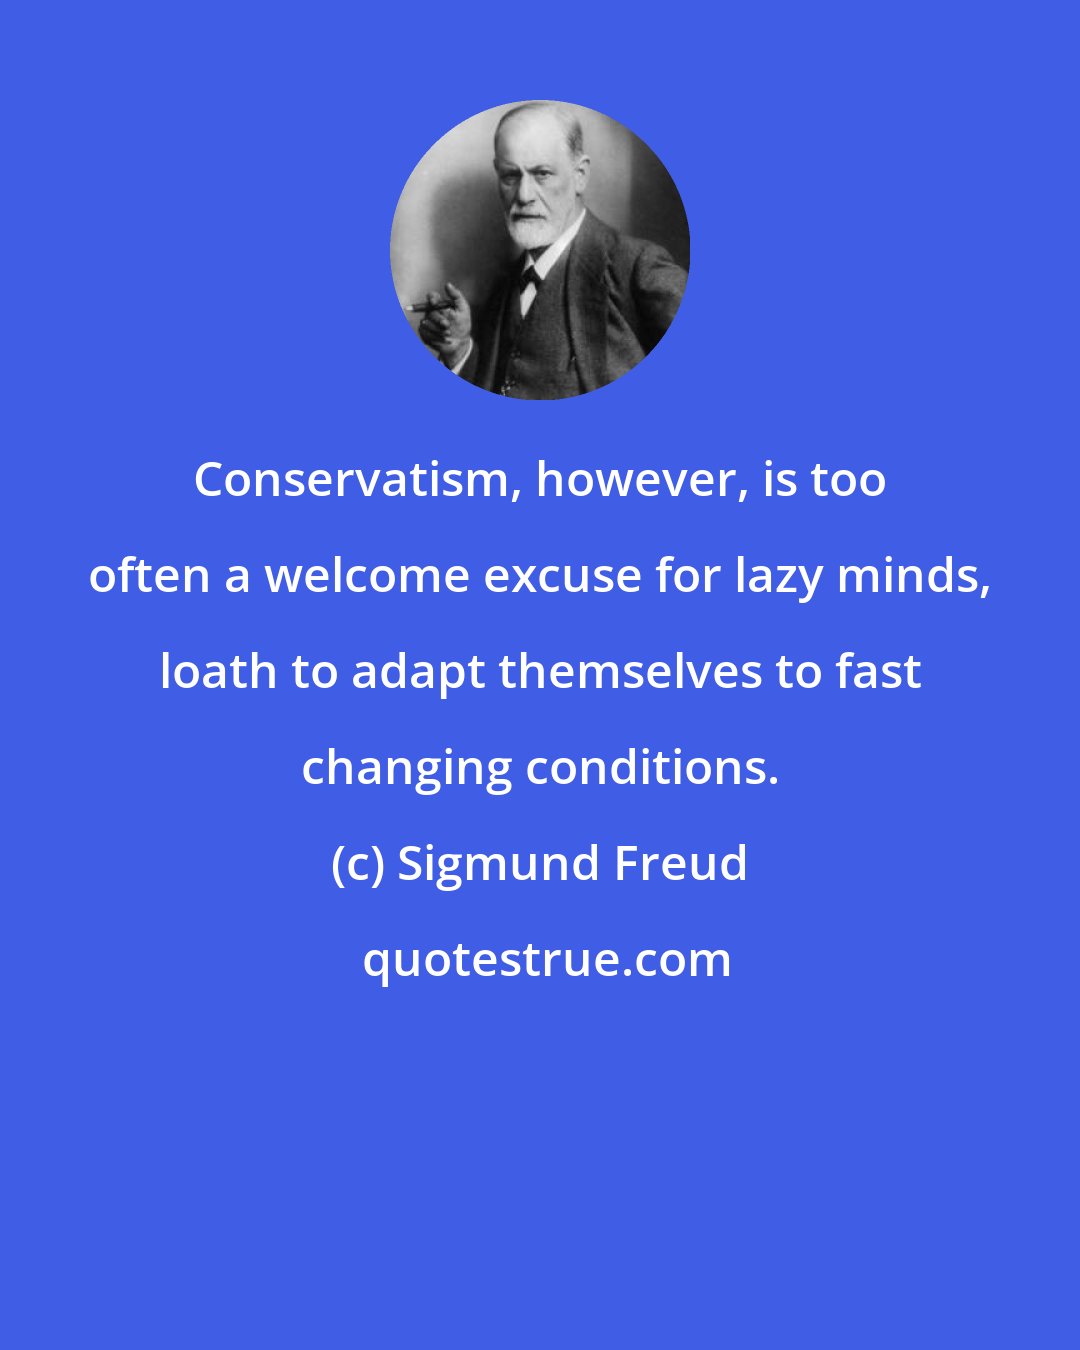 Sigmund Freud: Conservatism, however, is too often a welcome excuse for lazy minds, loath to adapt themselves to fast changing conditions.